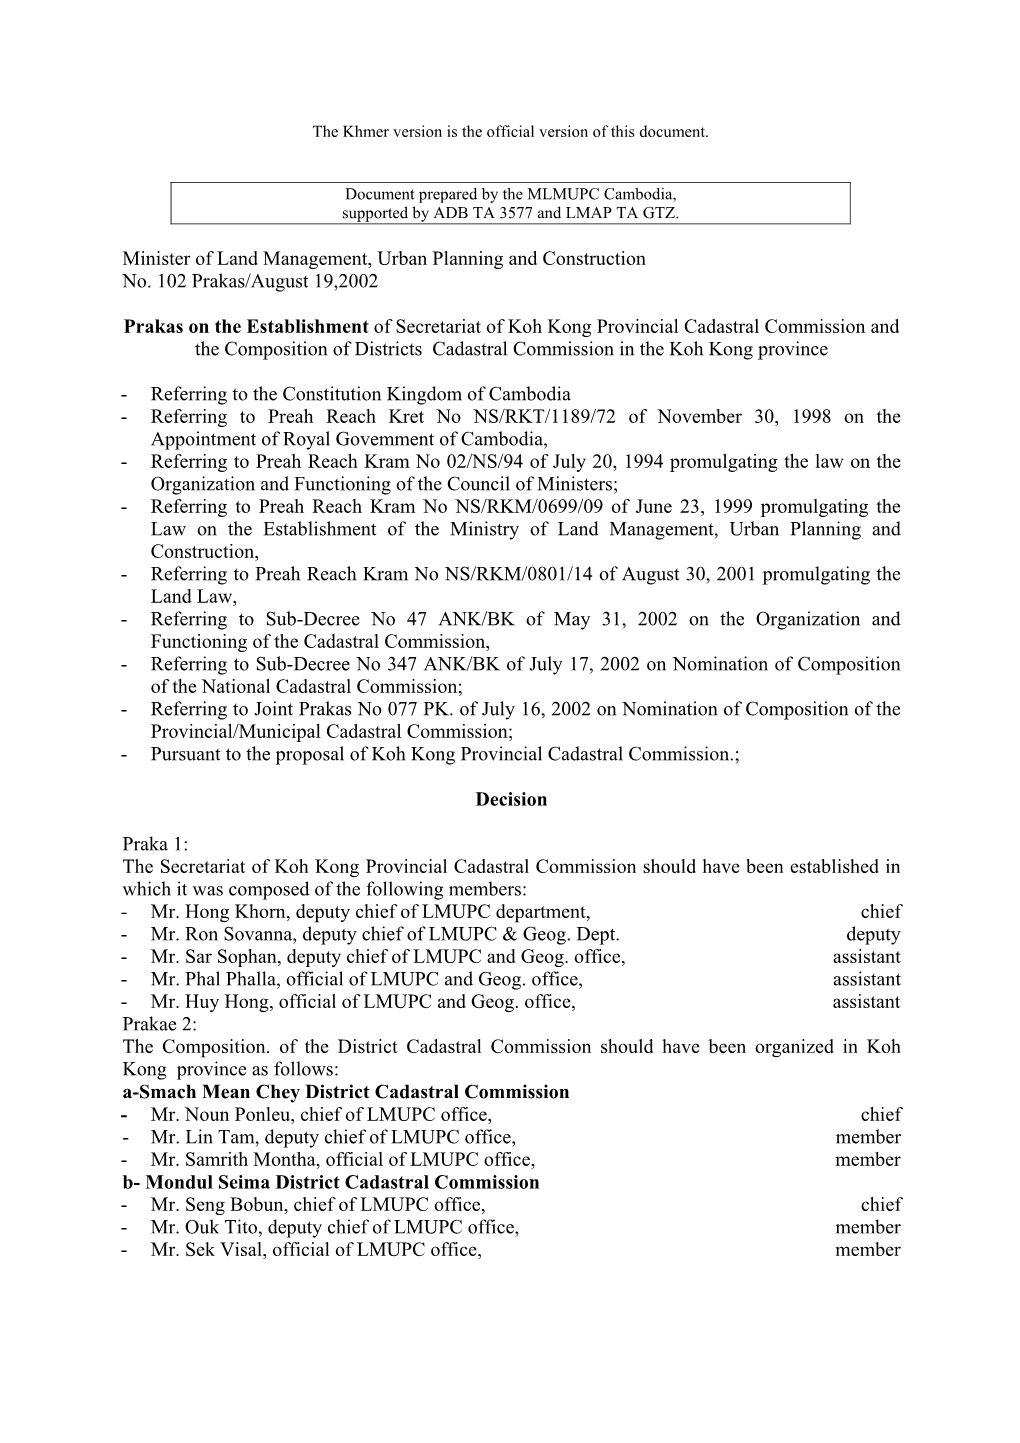 Prakas on the Establishment of Secretariat of Koh Kong Provincial Cadastral Commission and the Composition of Districts Cadastral Commission in the Koh Kong Province